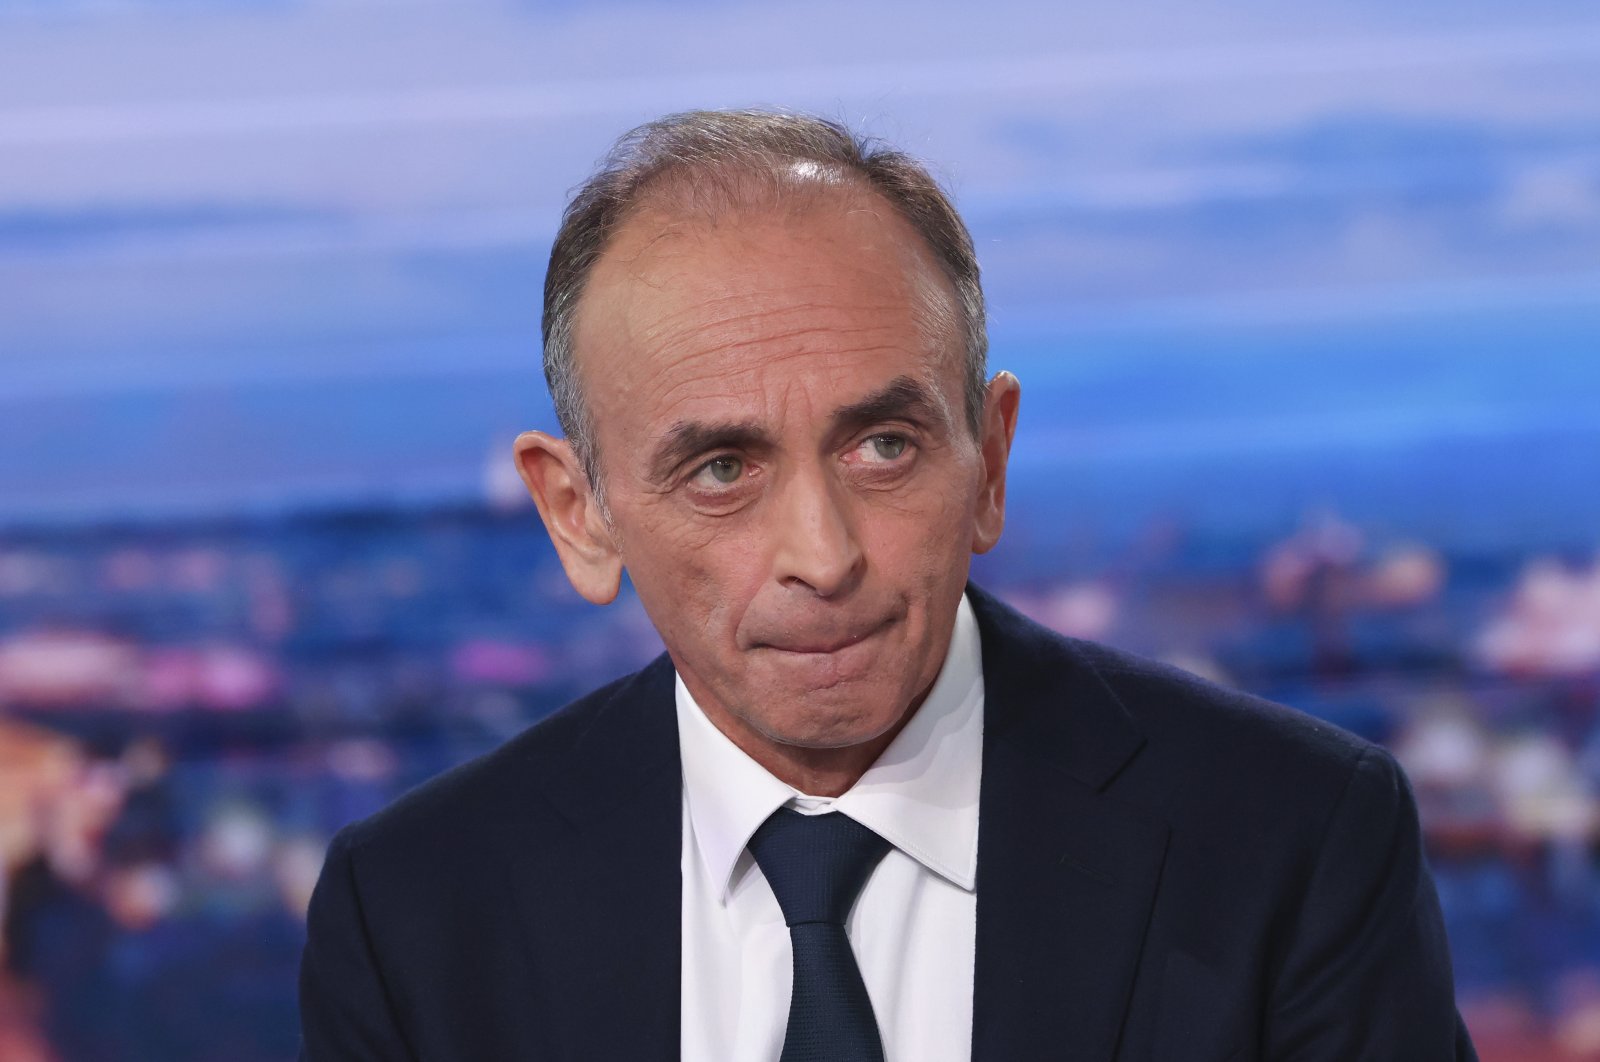 French far-right presidential candidate Eric Zemmour poses prior to a TV interviews at French TV station TF1 in Boulogne-Billancourt, outside Paris, Nov. 30, 2021. (AP Photo)